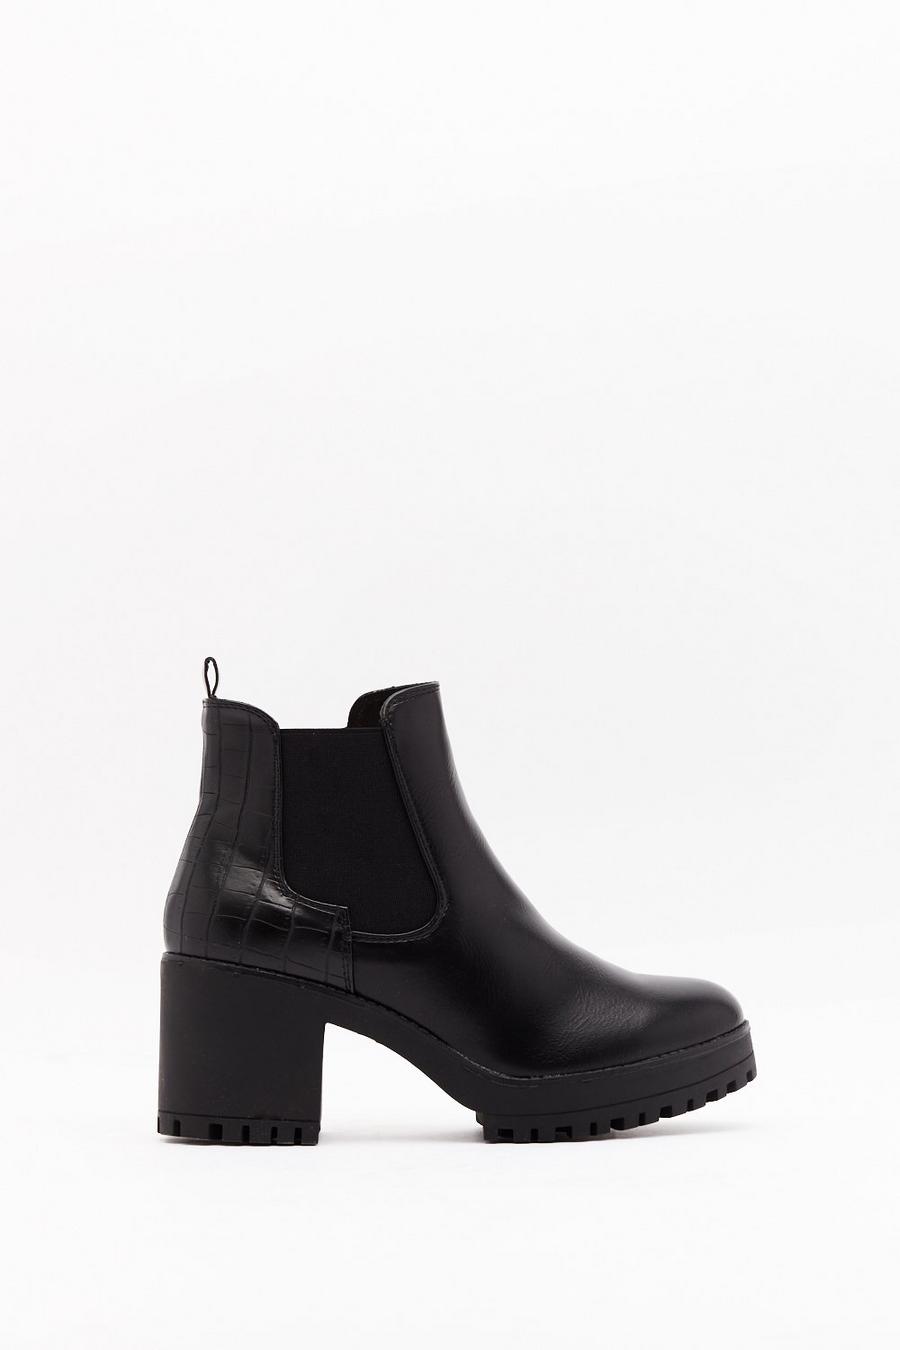 Race to the Croc Faux Leather Chelsea Boots